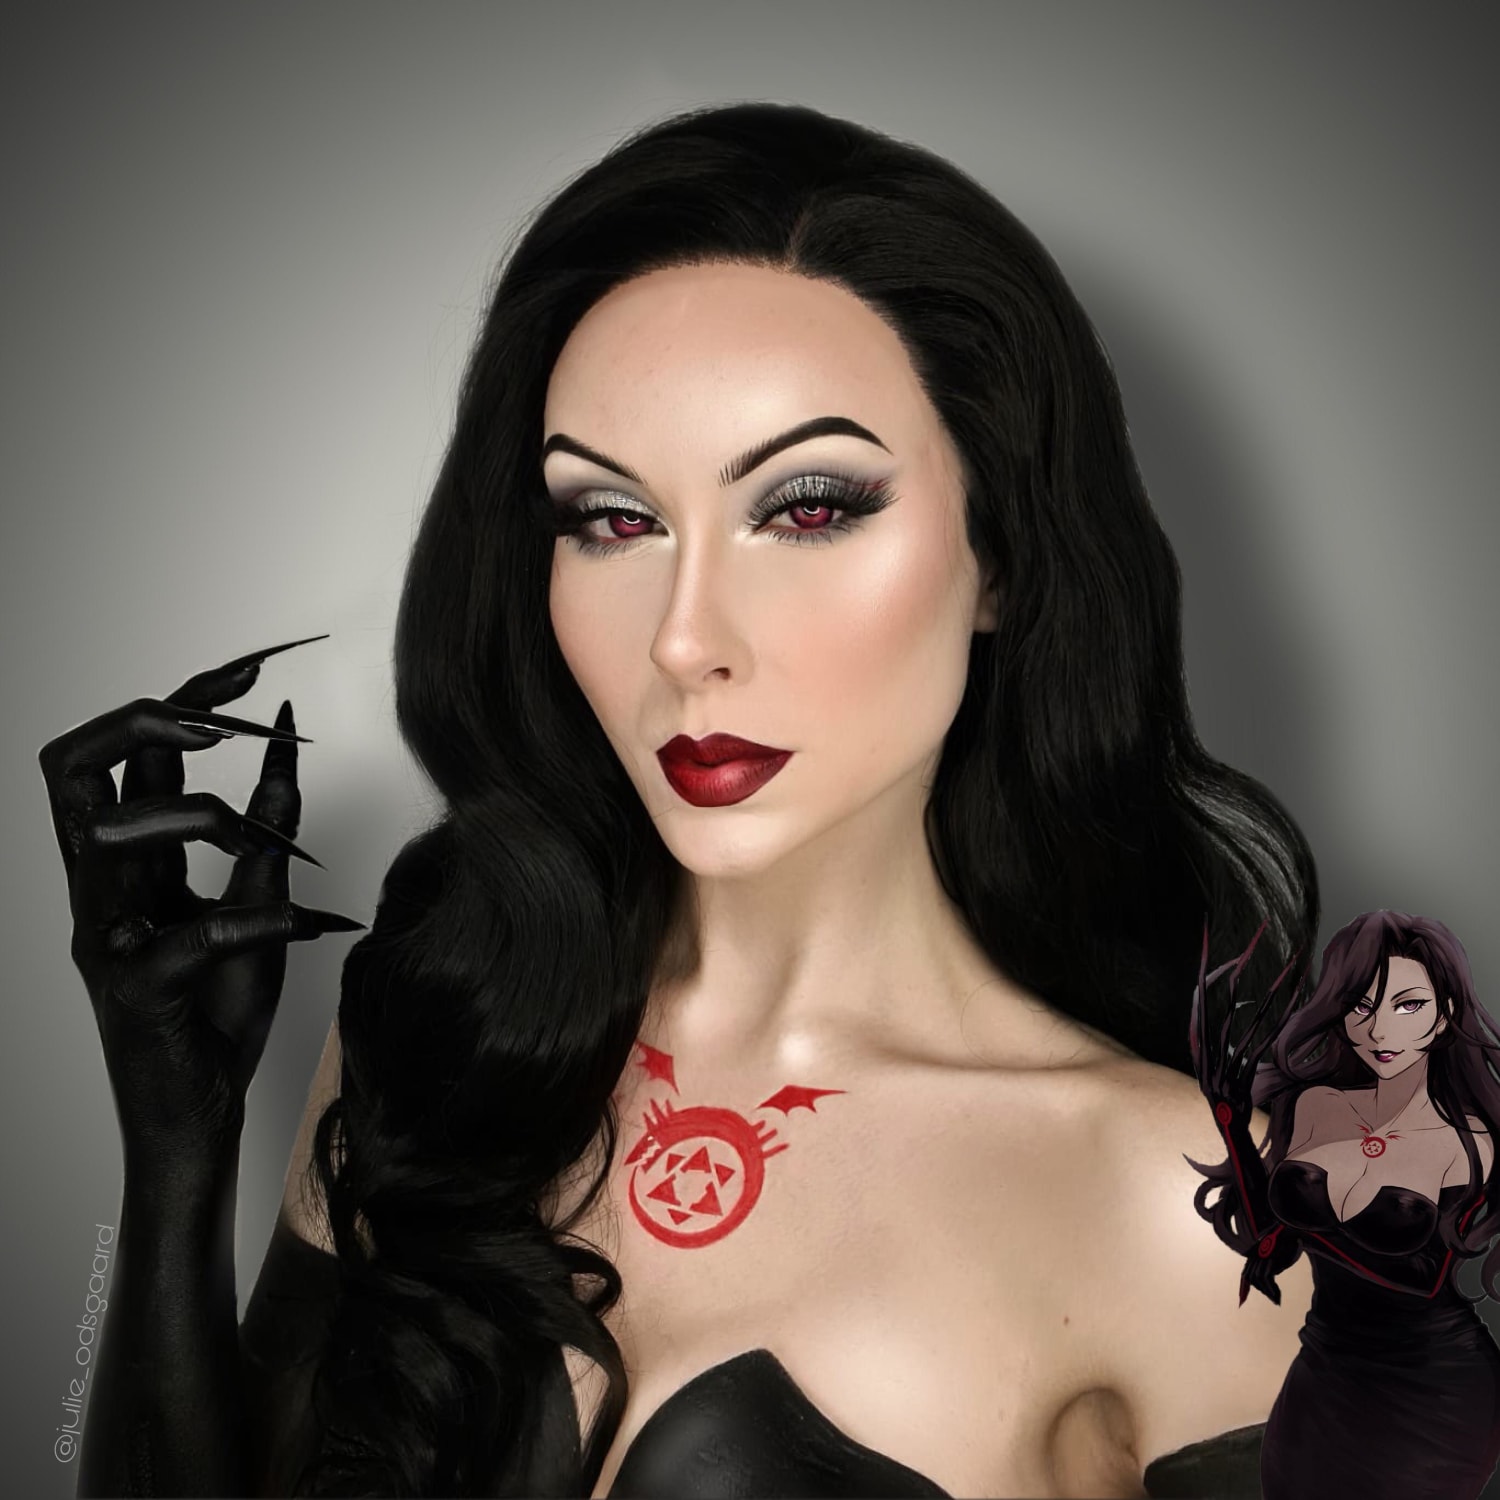 [self] Lust inspired make up and body paint. By julie_odsgaard